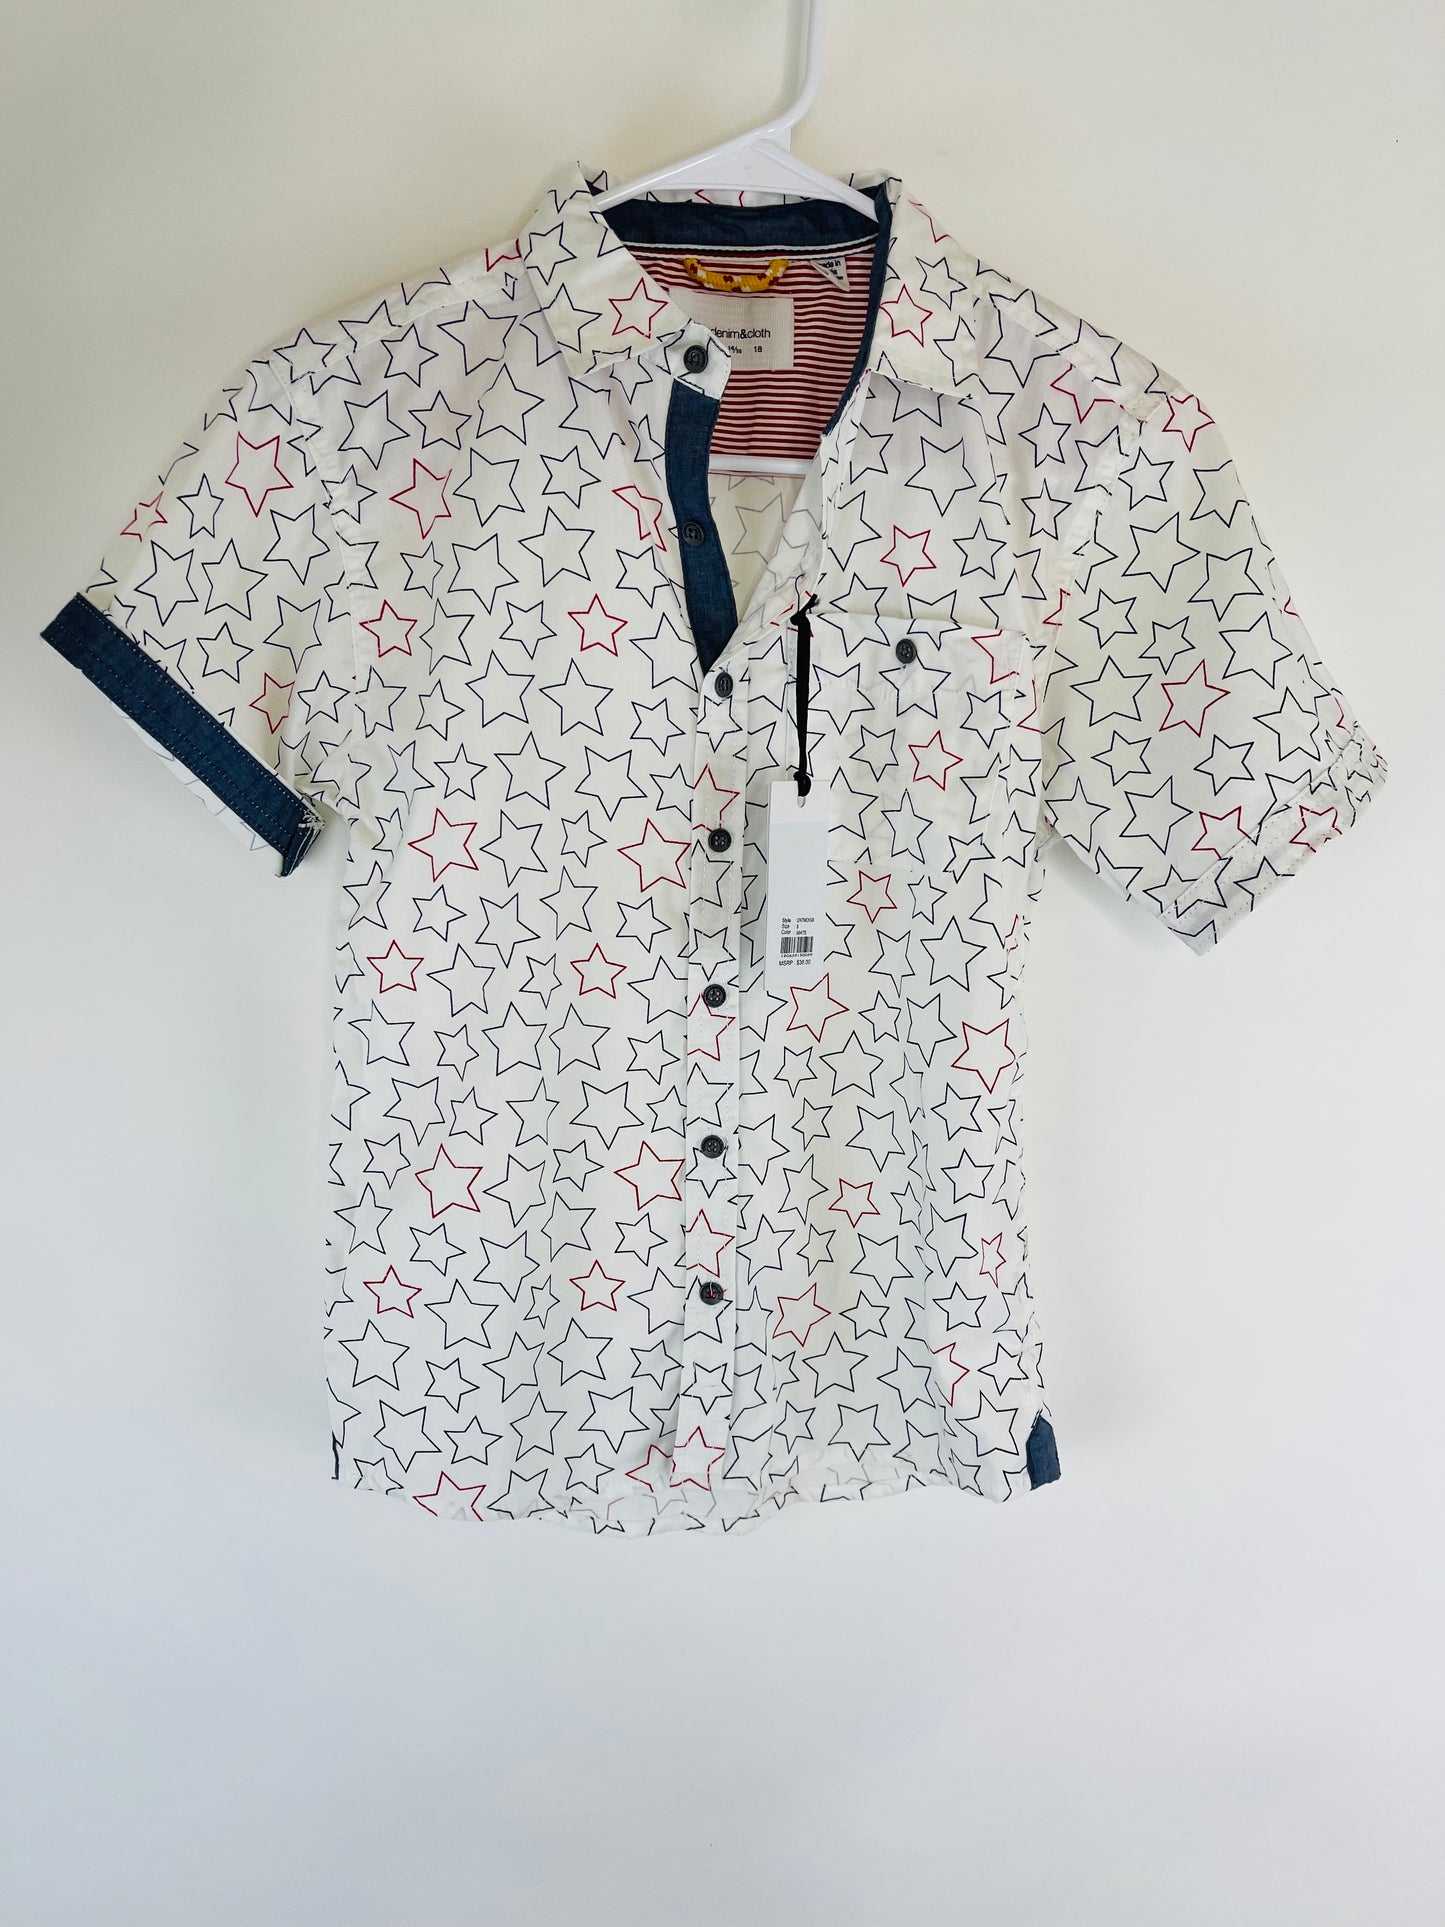 NWT - Patriotic Stars Button Up Short Sleeve Shirt - Youth M (8)